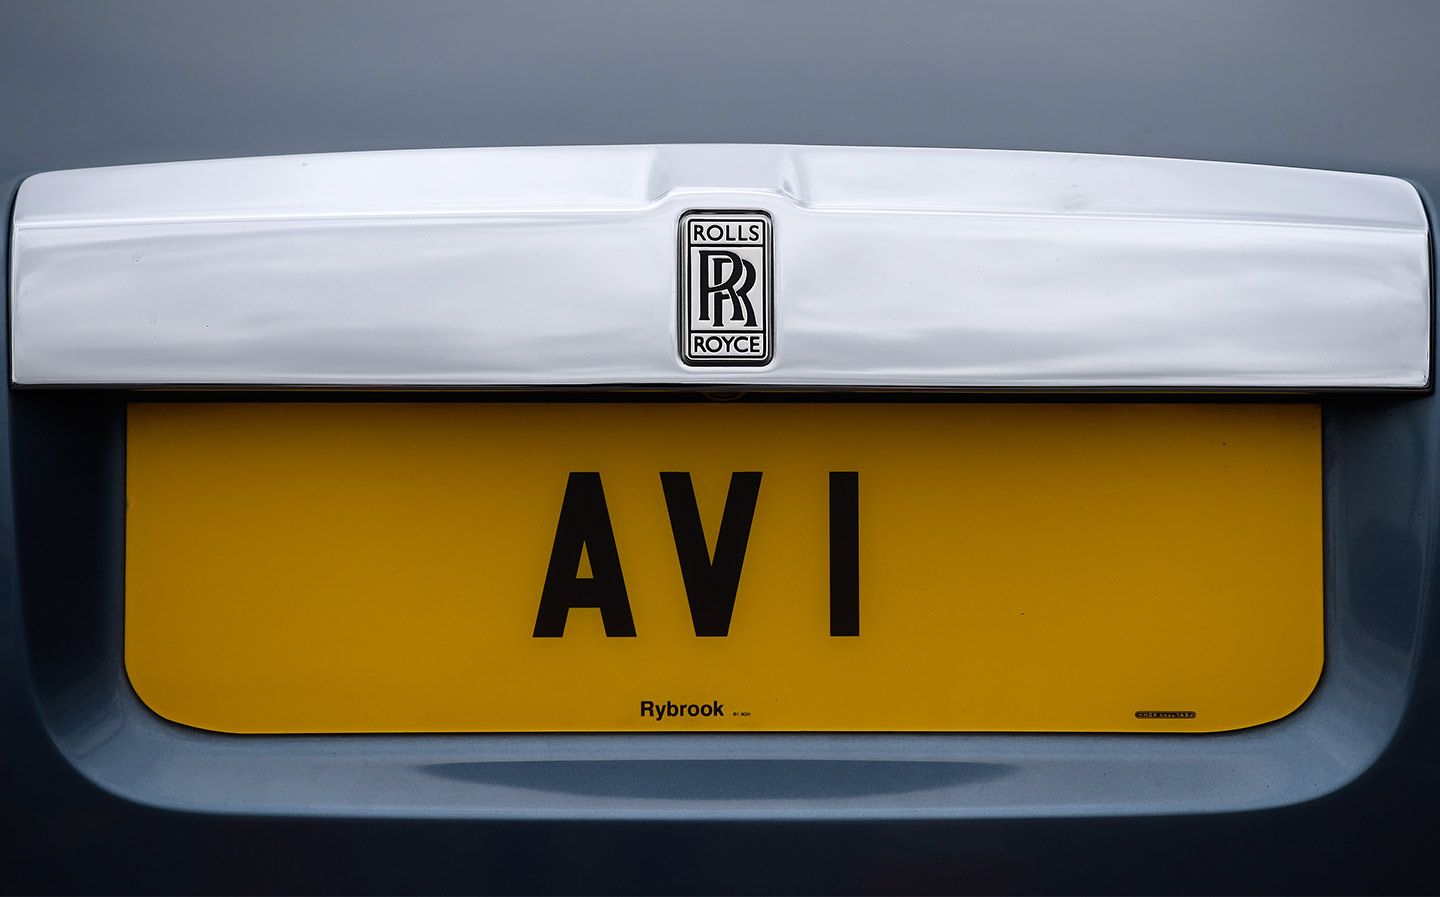 dvla, number plates, personalised numberplates, registration plates, what year is my car? uk car number plate years explained